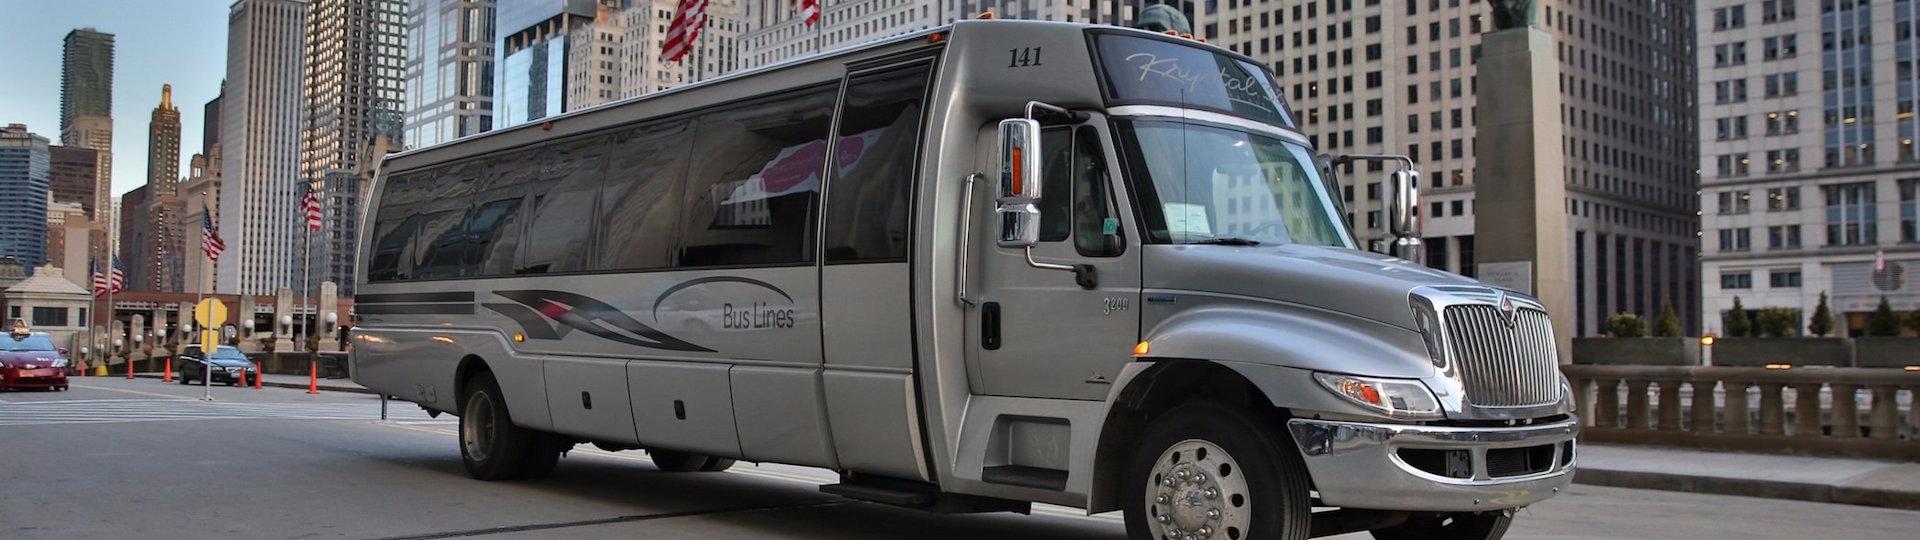 Corporate Limo Bus Chicago